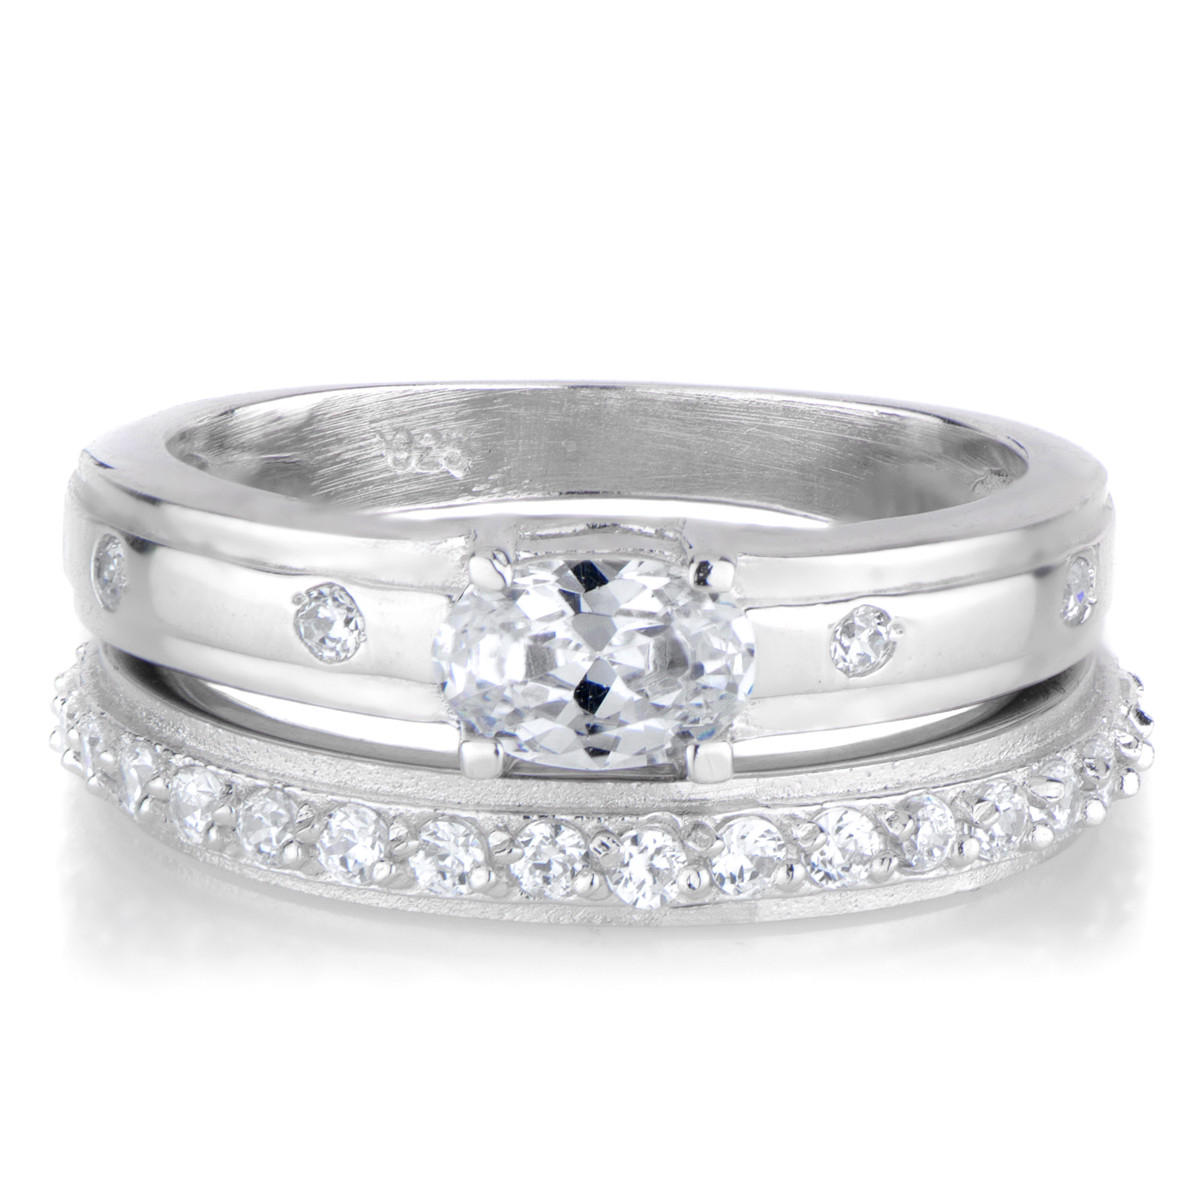 Kay Jewelers Wedding Ring Sets
 Beautiful Kay Jewelers Engagement Rings Clearance